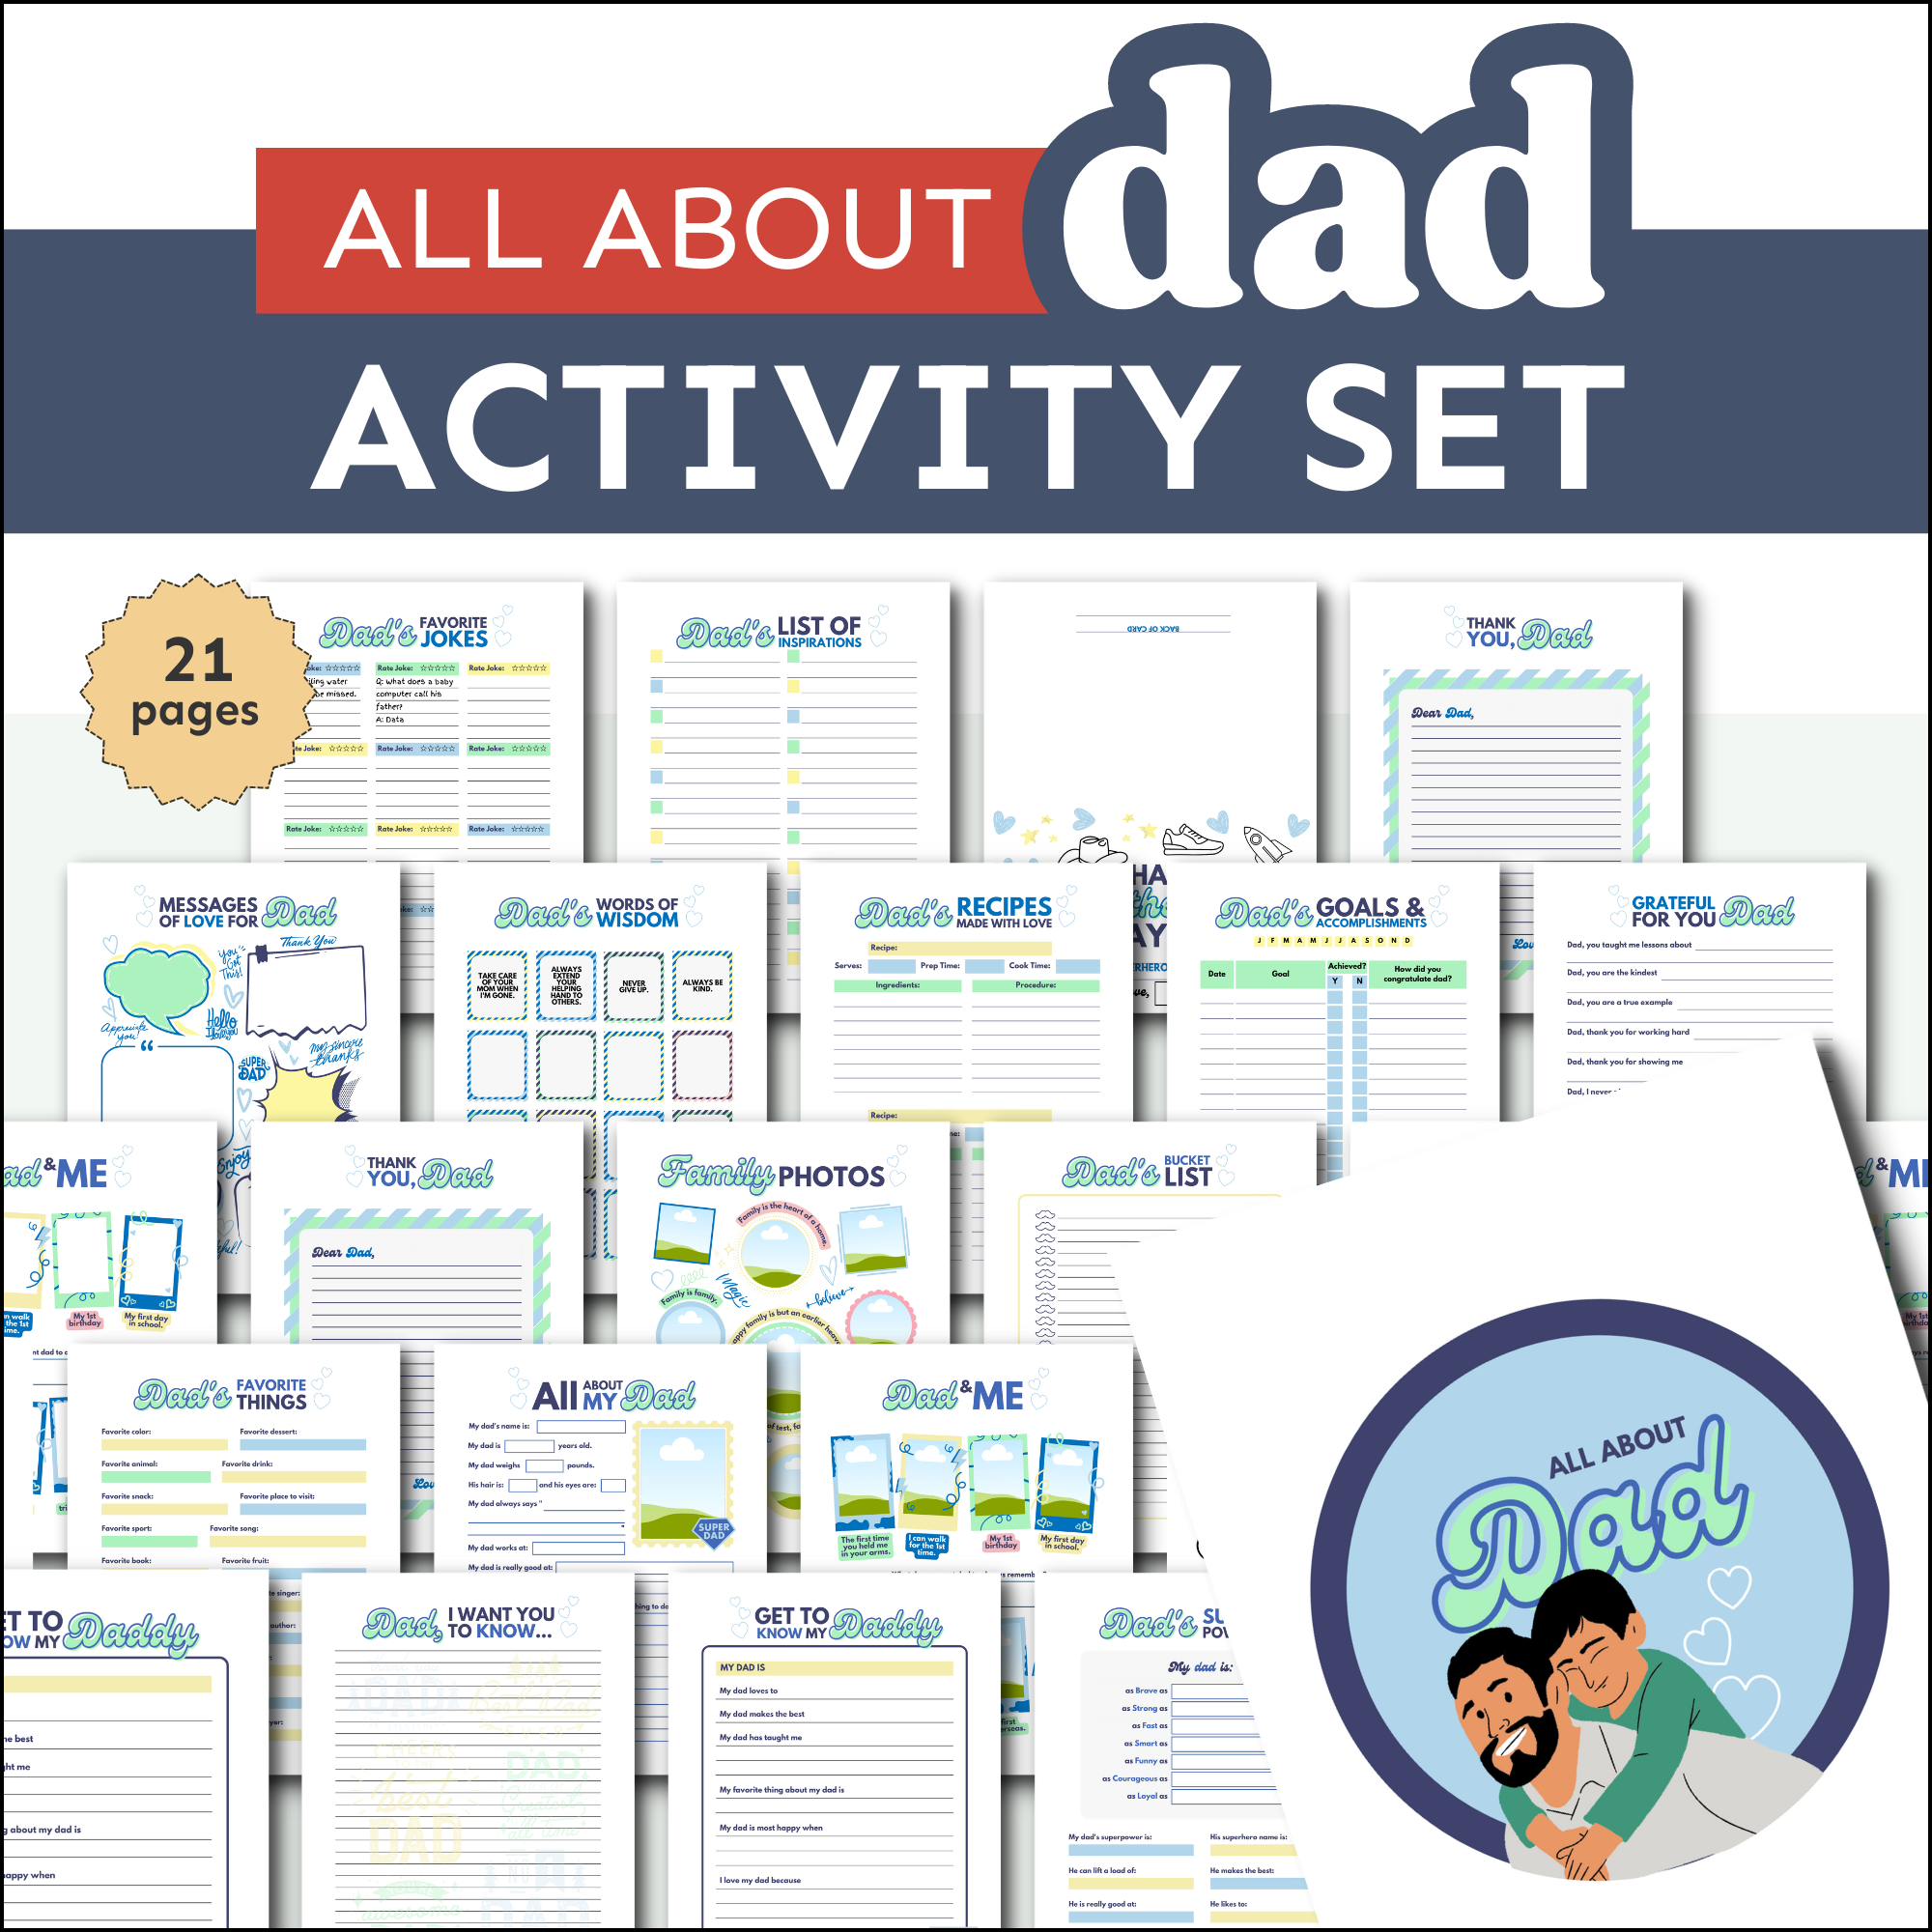 All About Dad & Father's Day Mini Kit